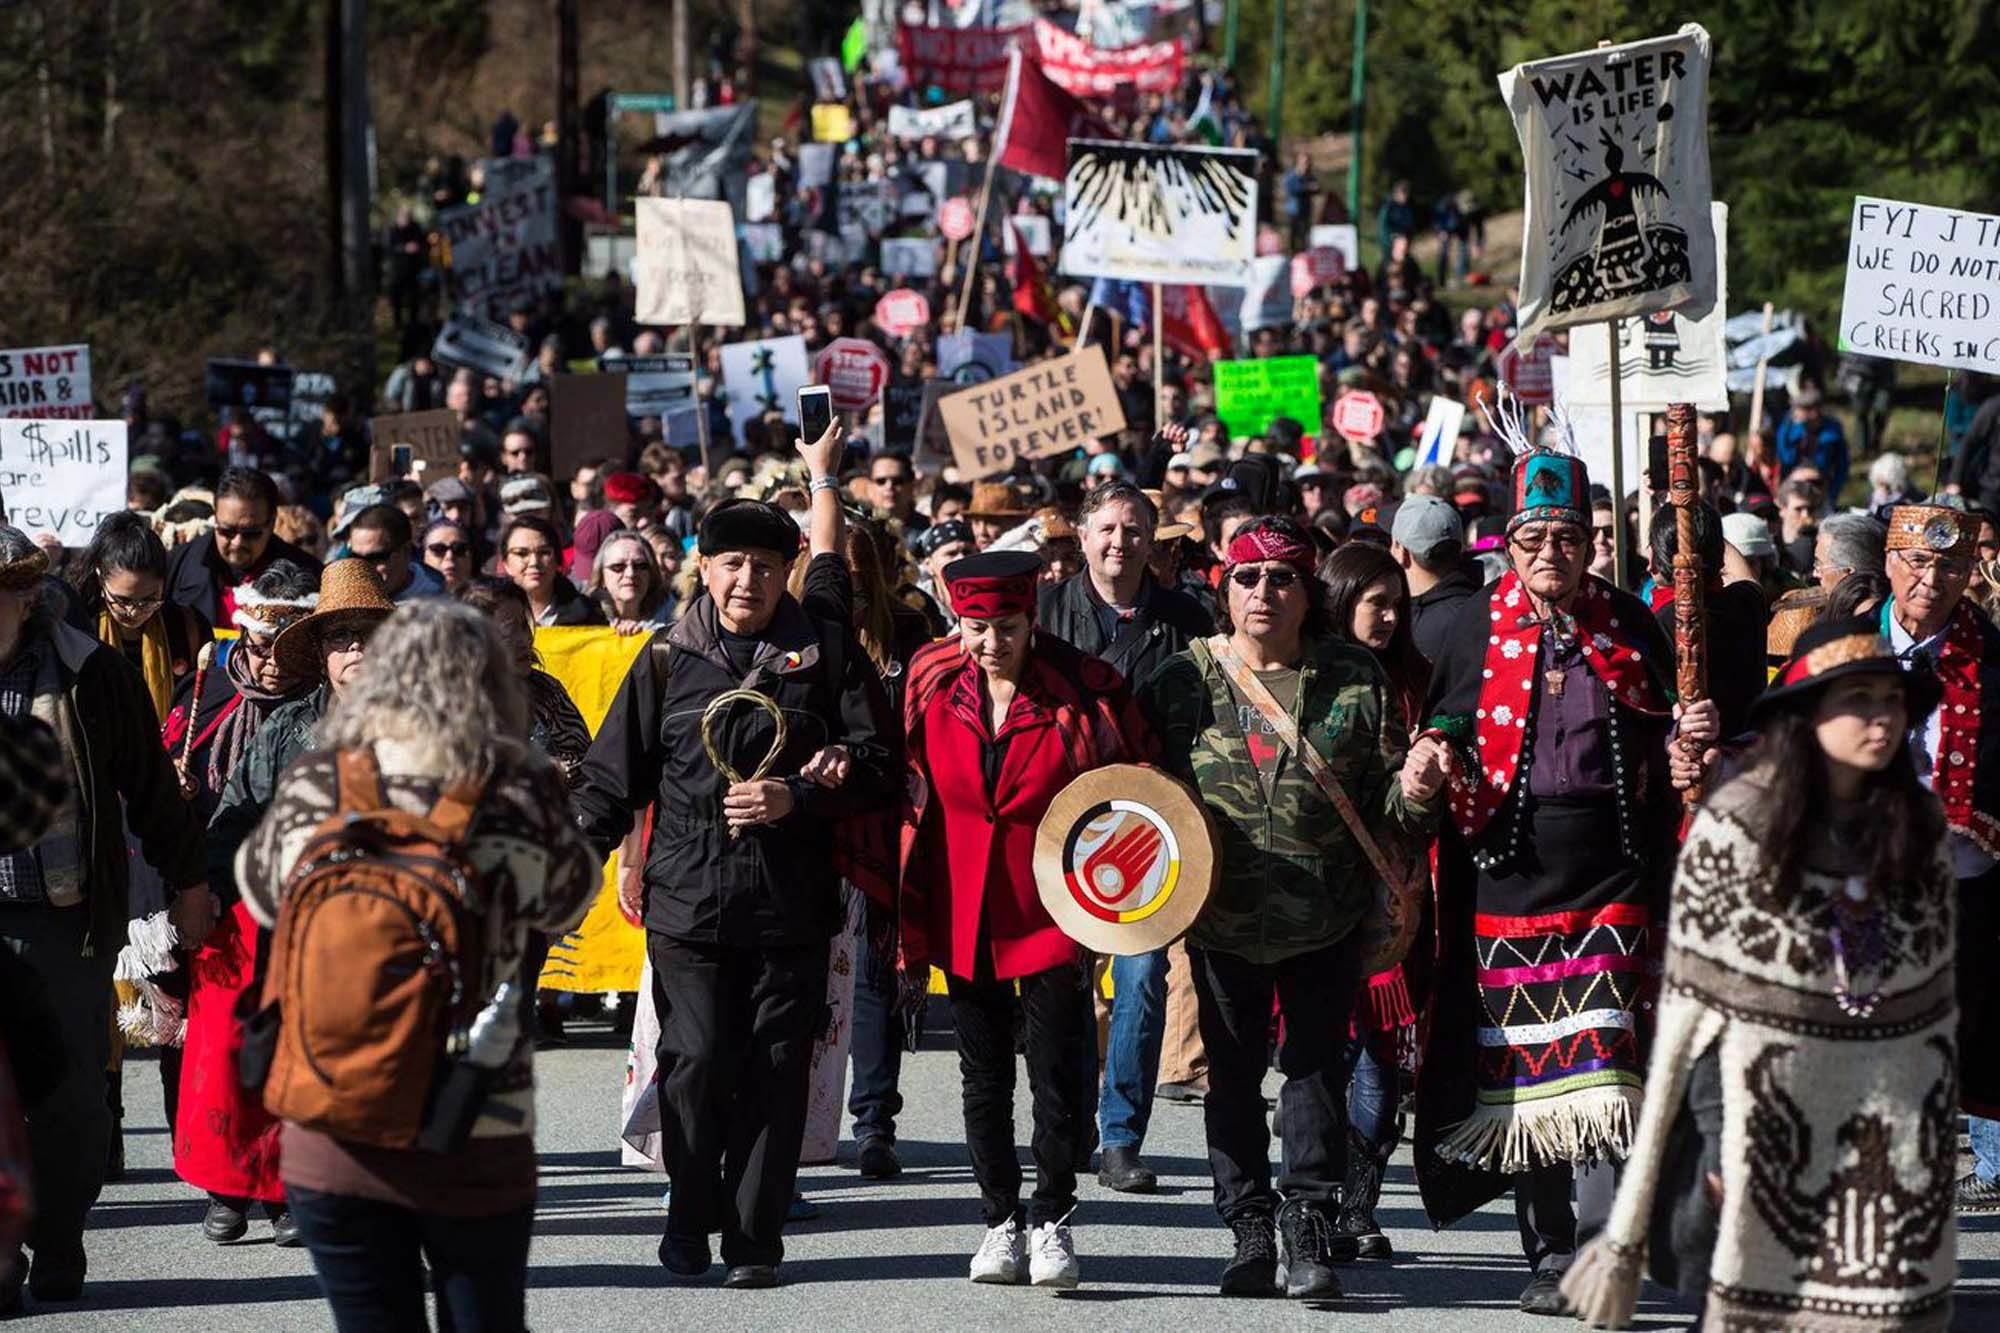 Protestors march against the pipeline. Now campaigners are focused on uninsuring Trans Mountain.